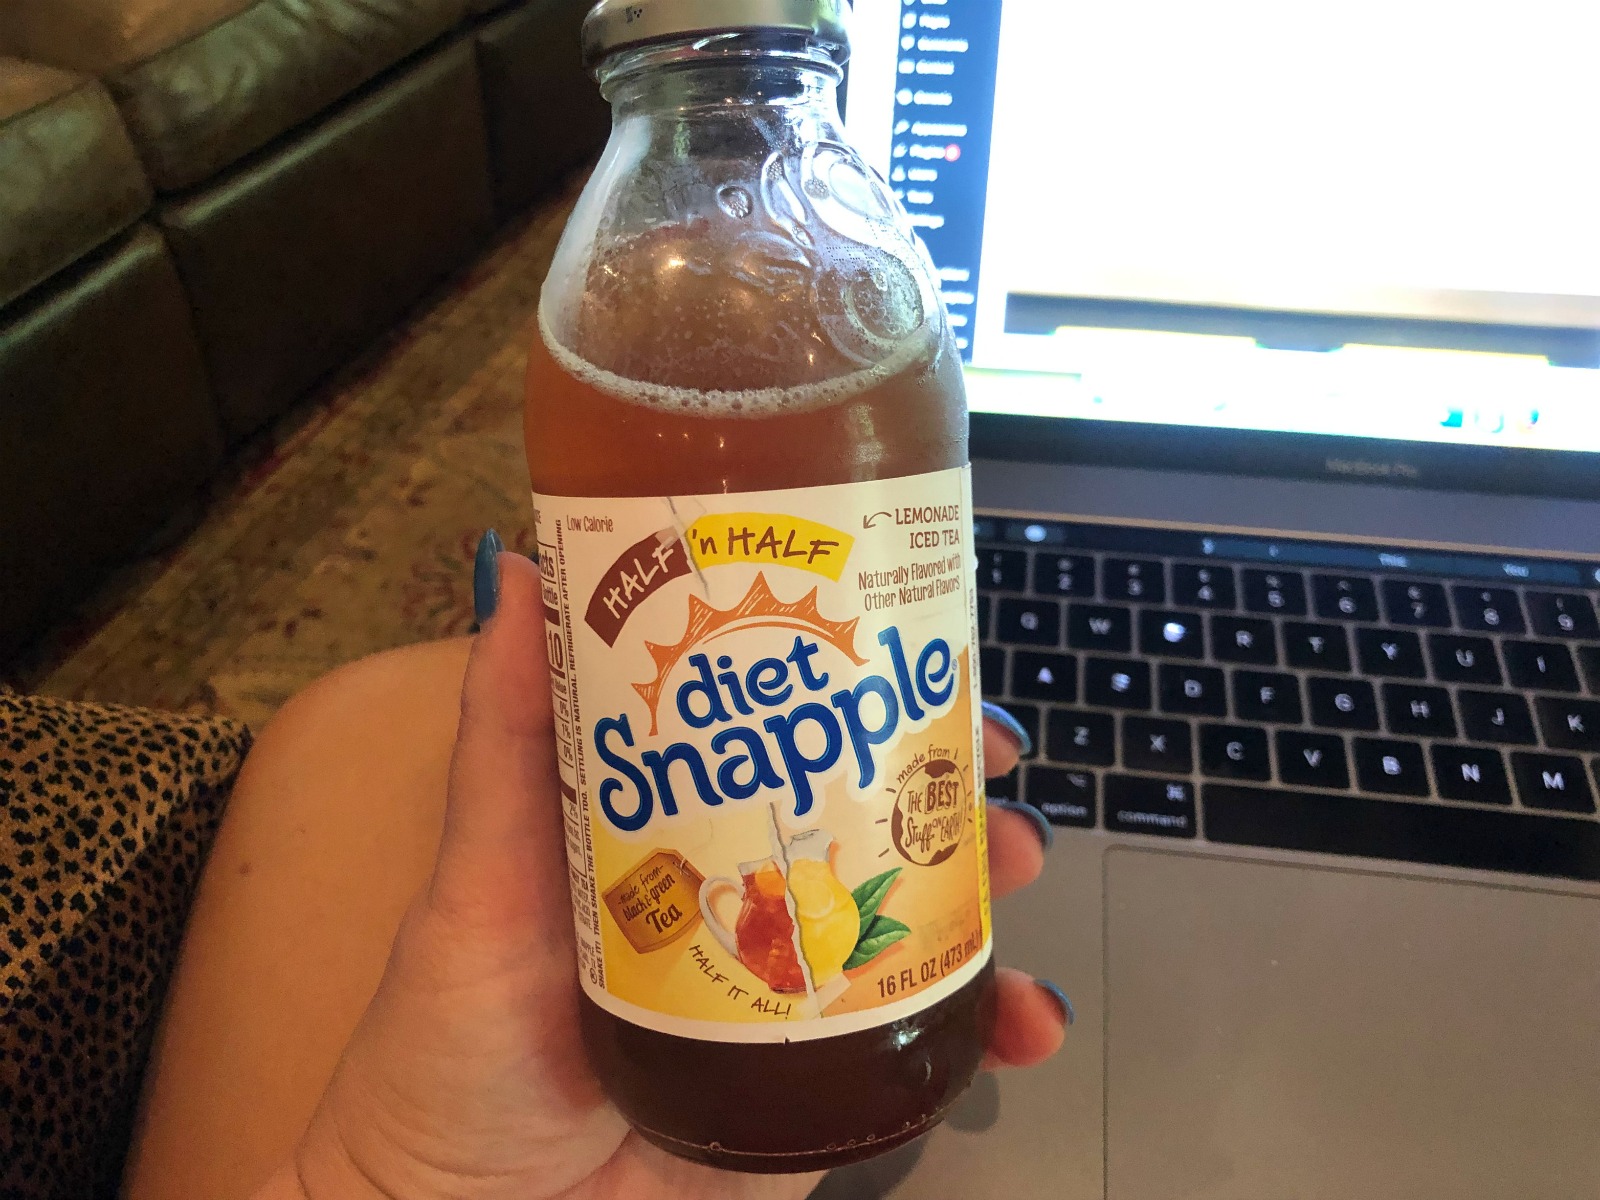 Reminder - Stock Up On All Your Favorite Snapple Flavors During The Publix BOGO Sale on I Heart Publix